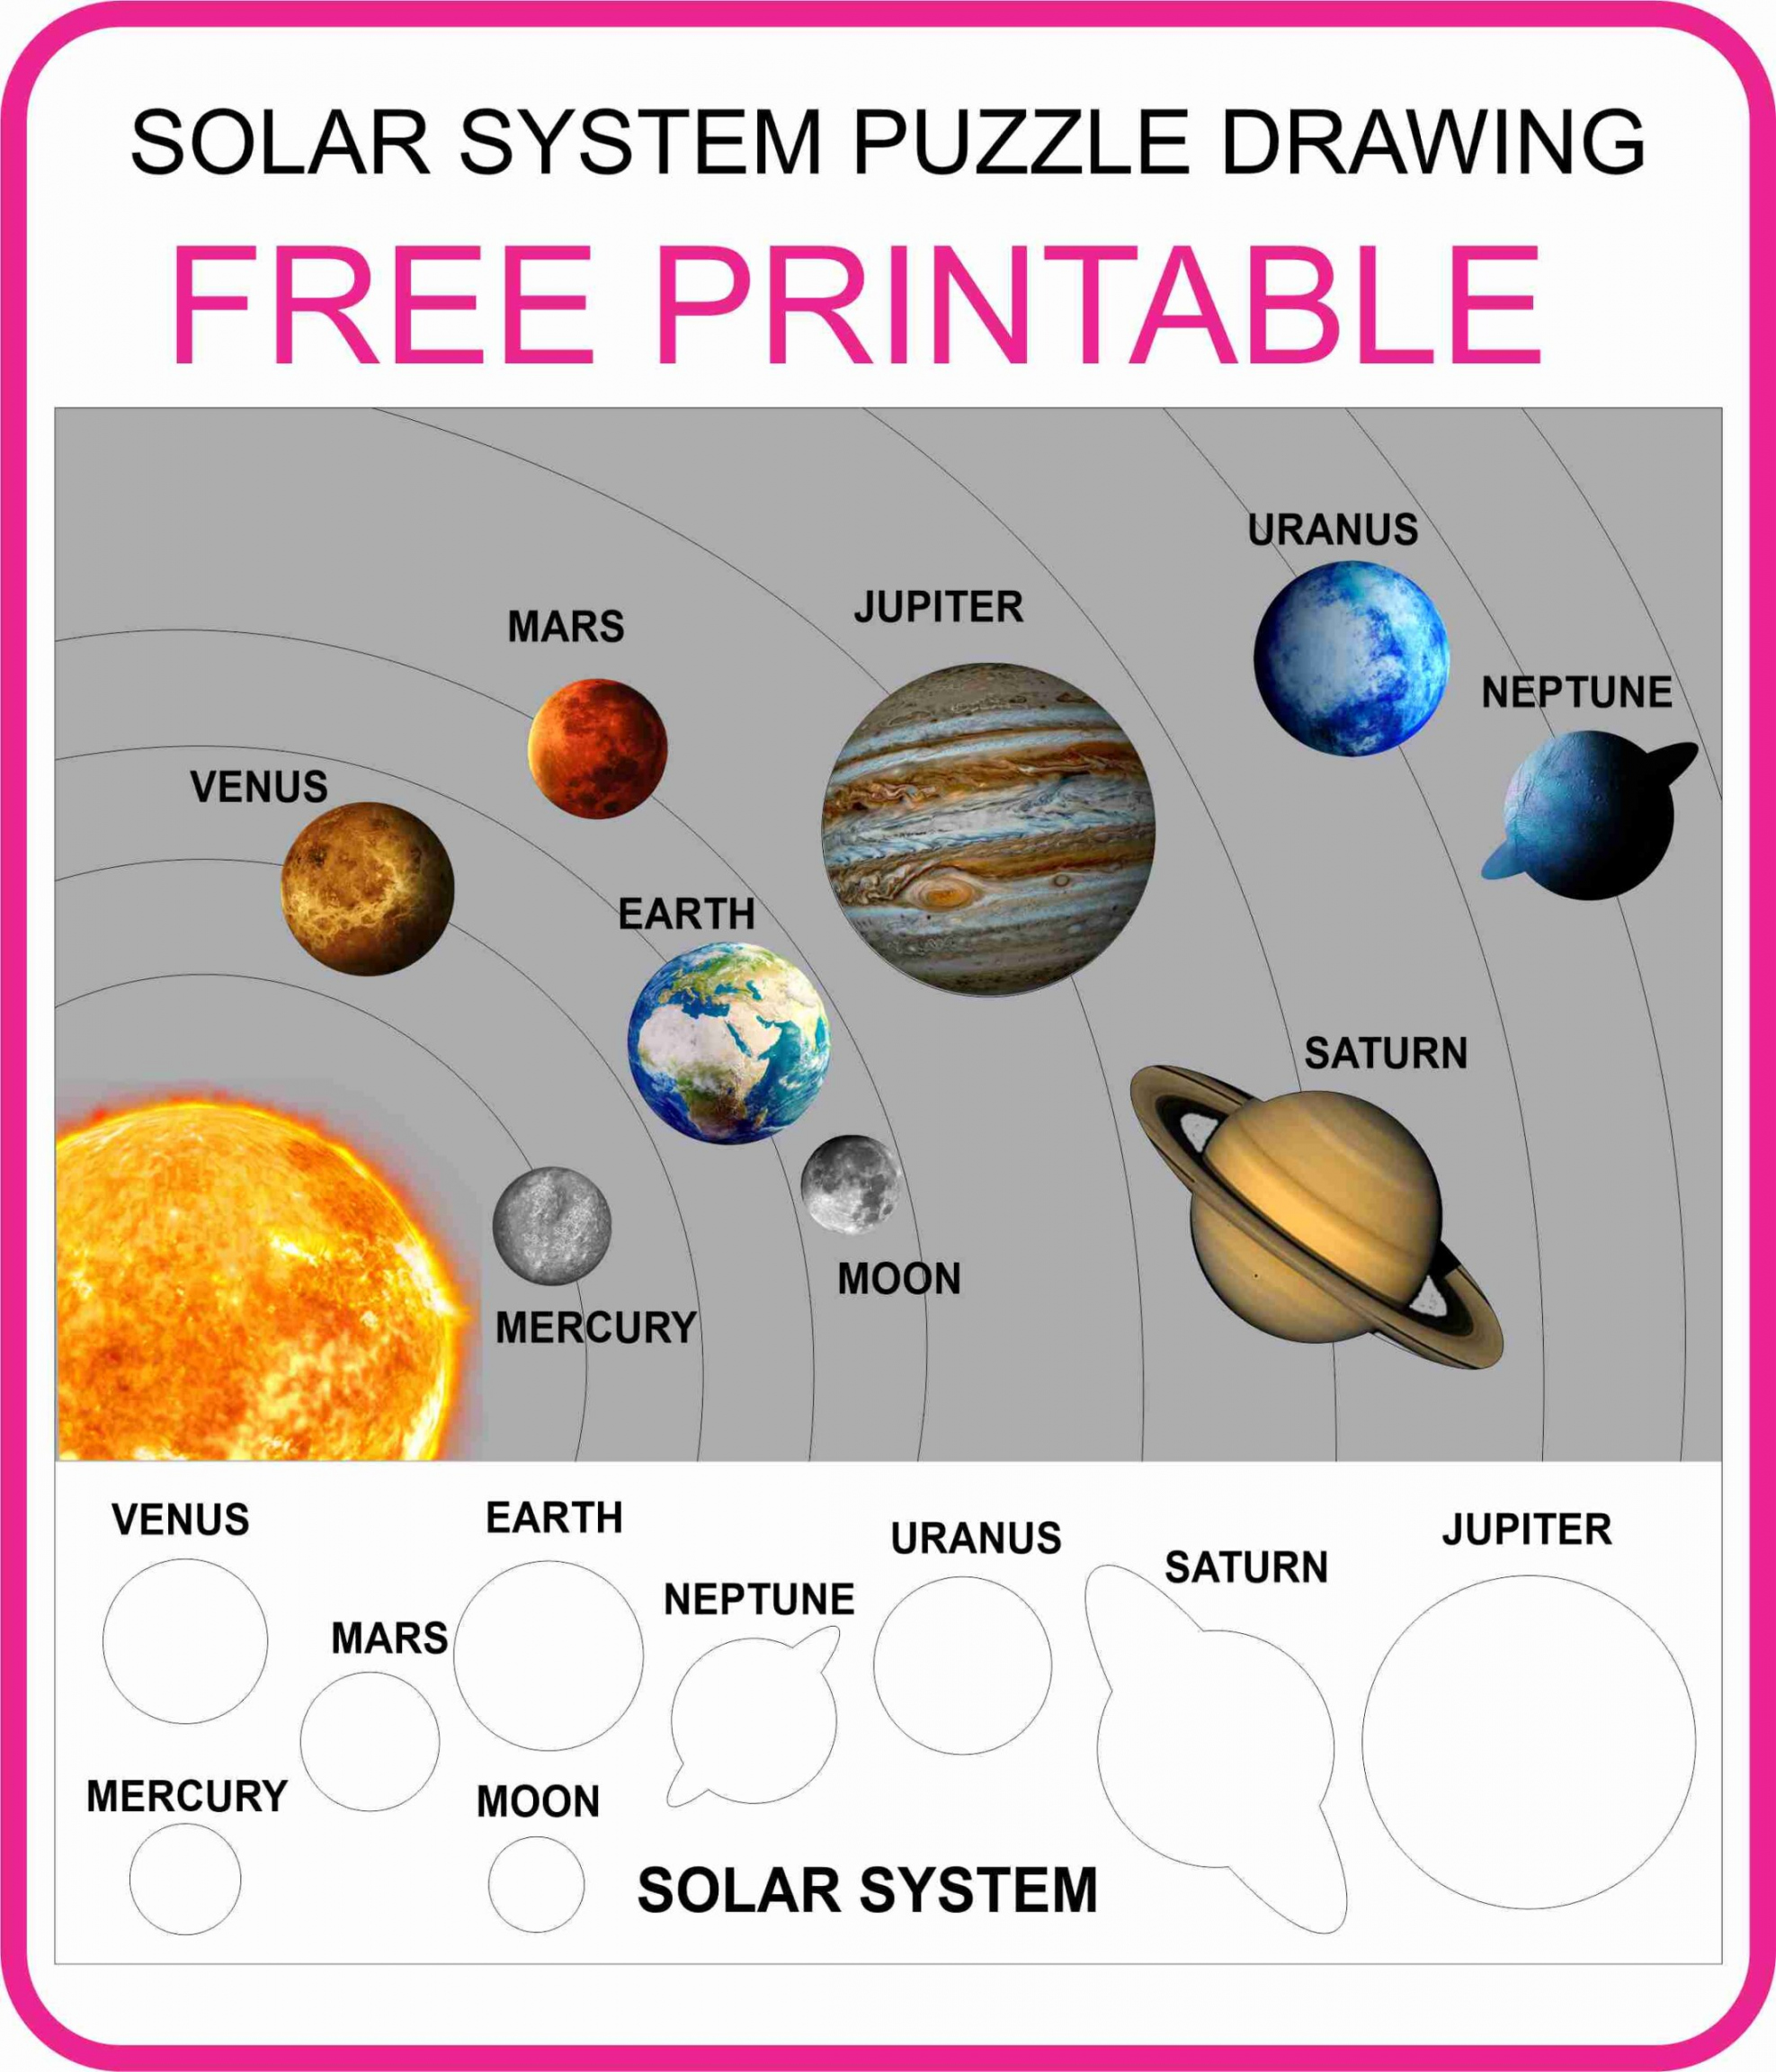 Solar System Drawing Puzzle- Free Pintable Cards  Montessoriseries - FREE Printables - Printable Free Printable Solar System Planets